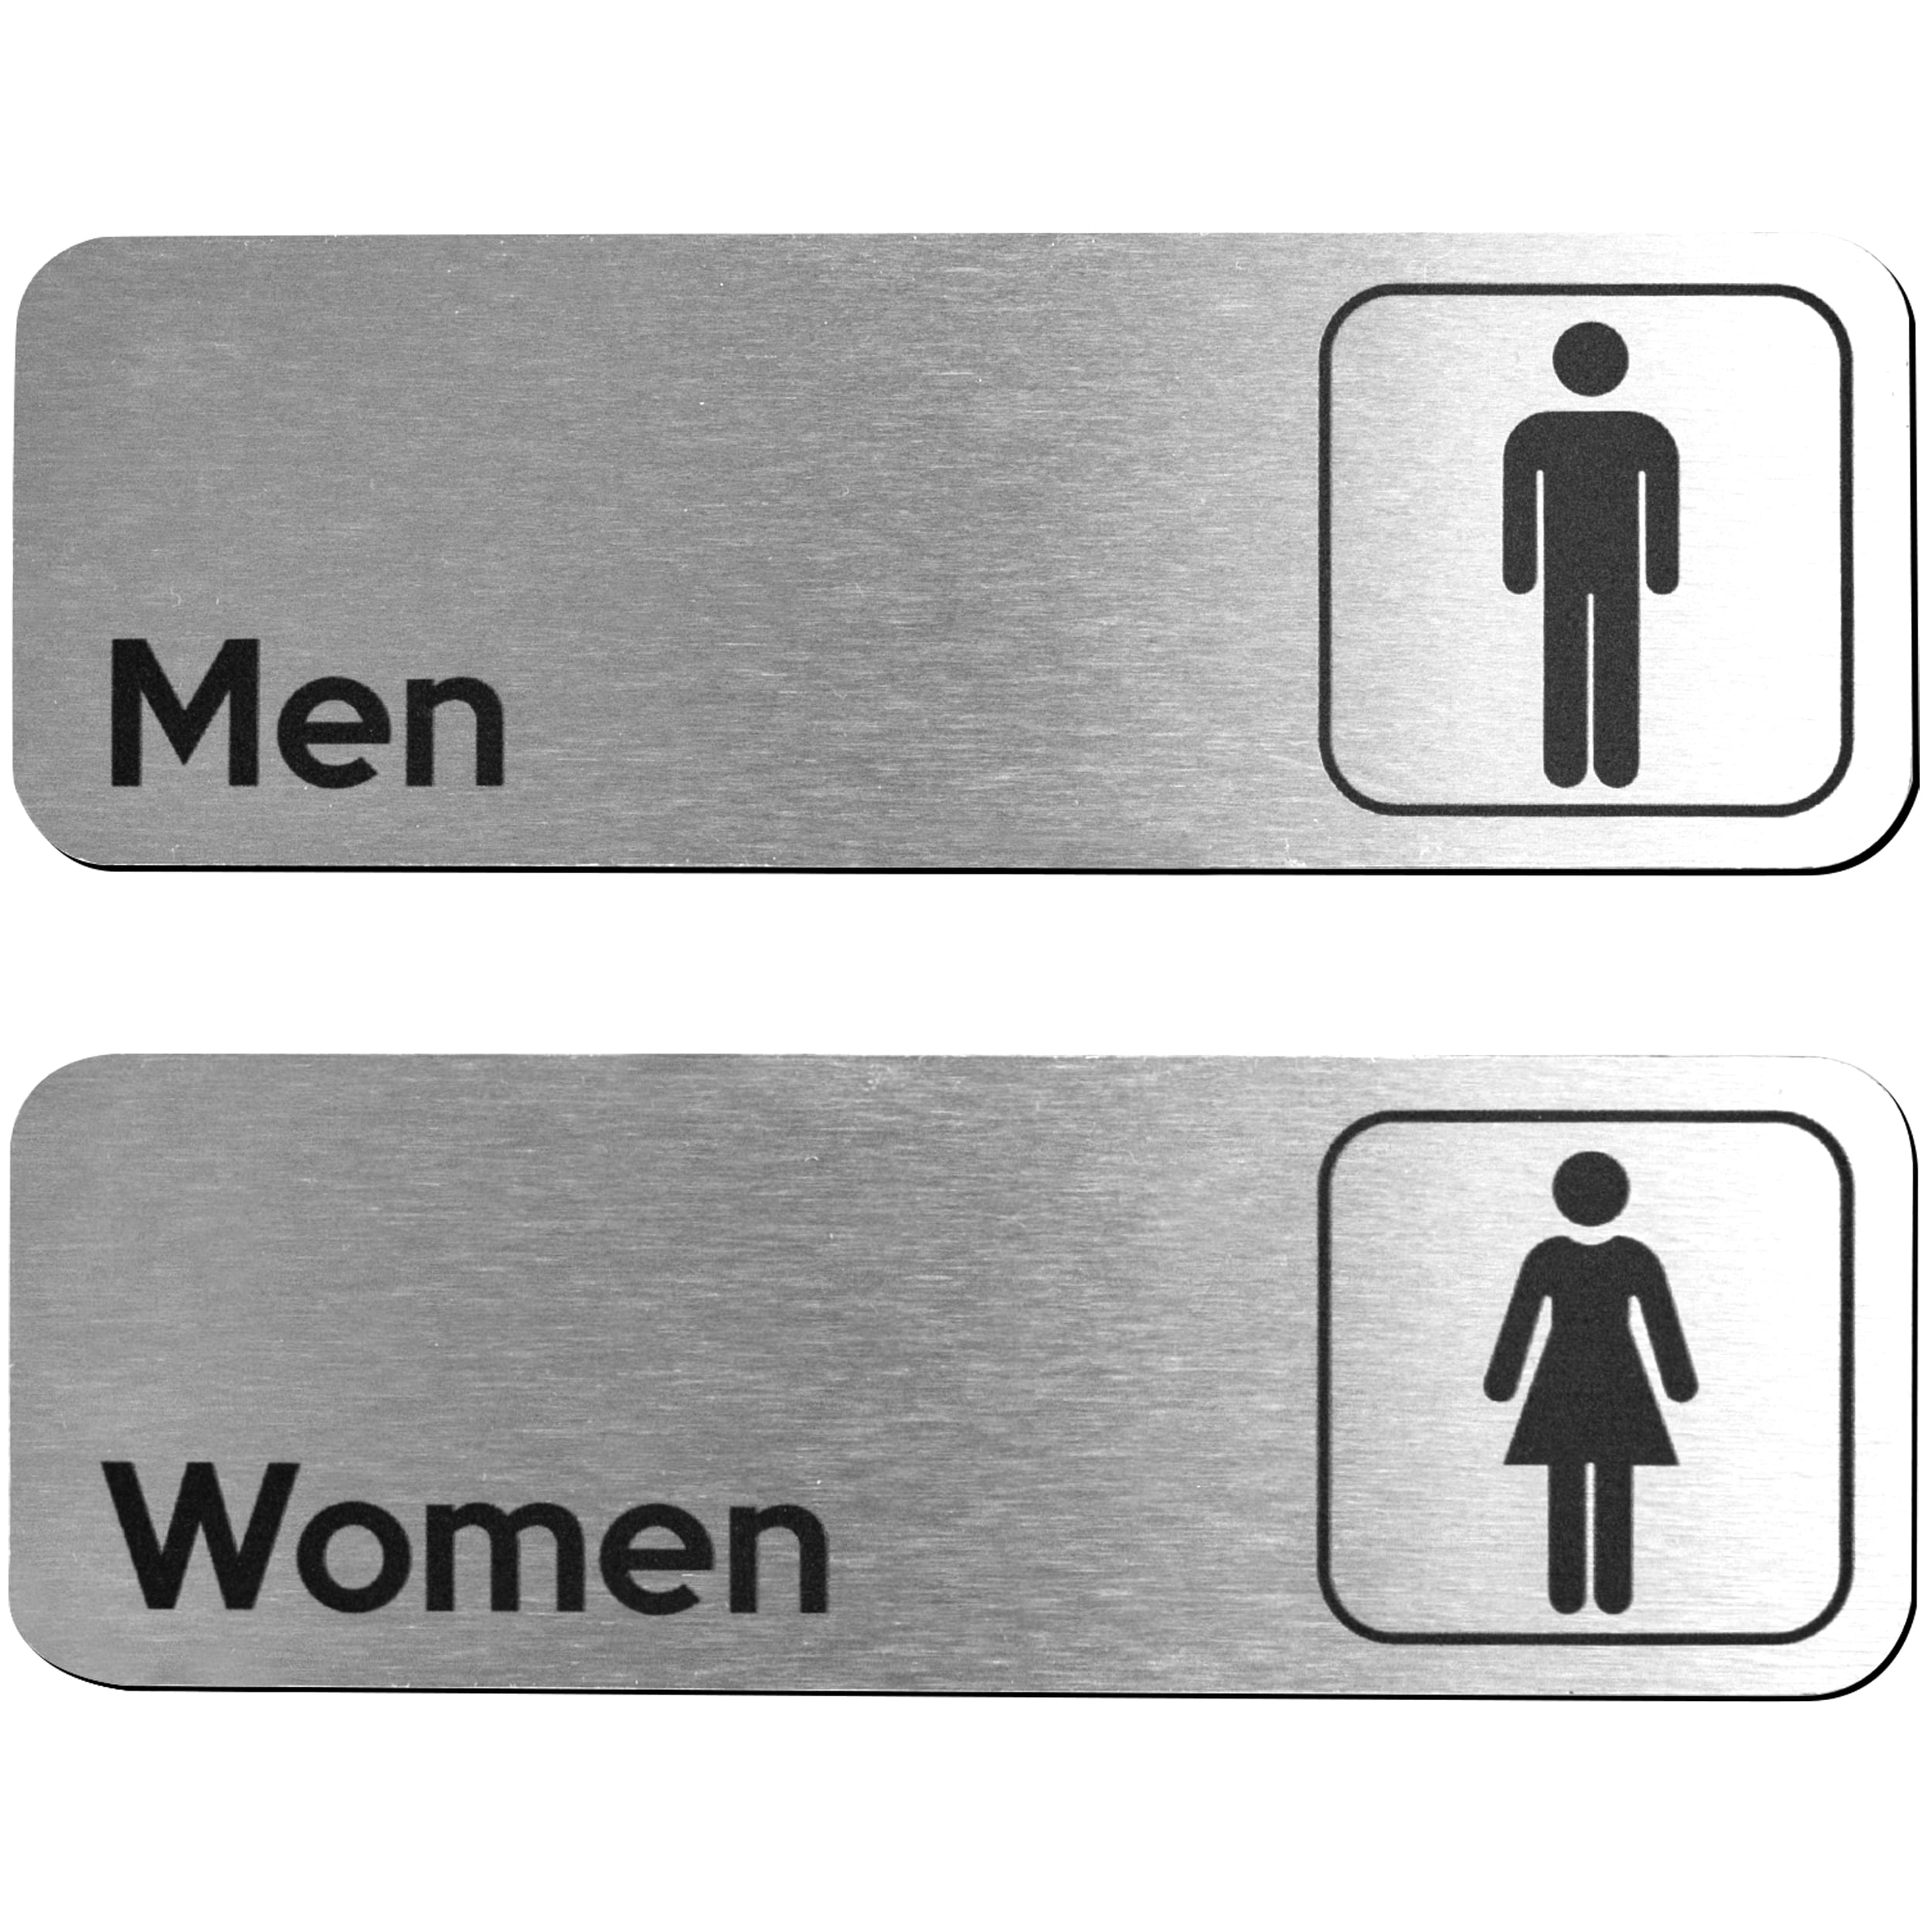 Washroom Toilet Sign Pack Safety Signs Plaque Poster Display Commercial 